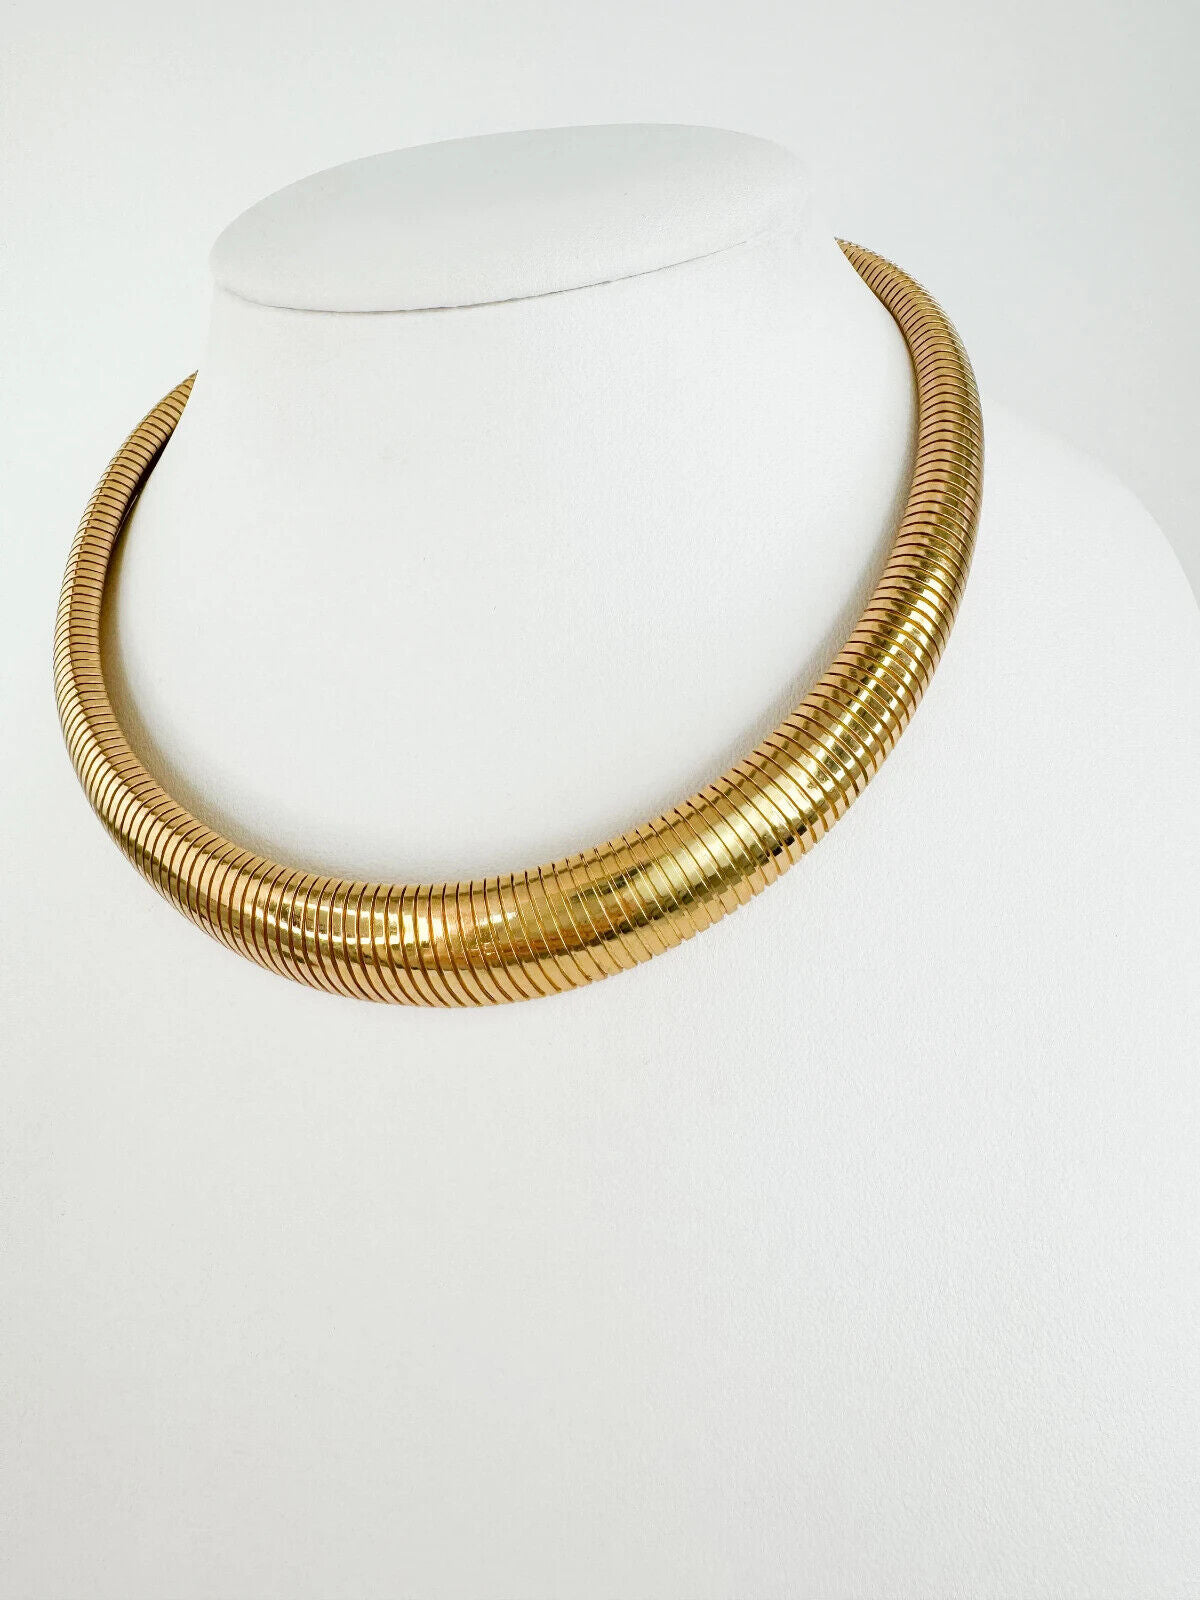 Christian Dior Necklace Chain Tubogas Snake Chain Gold zipper choker Vintage